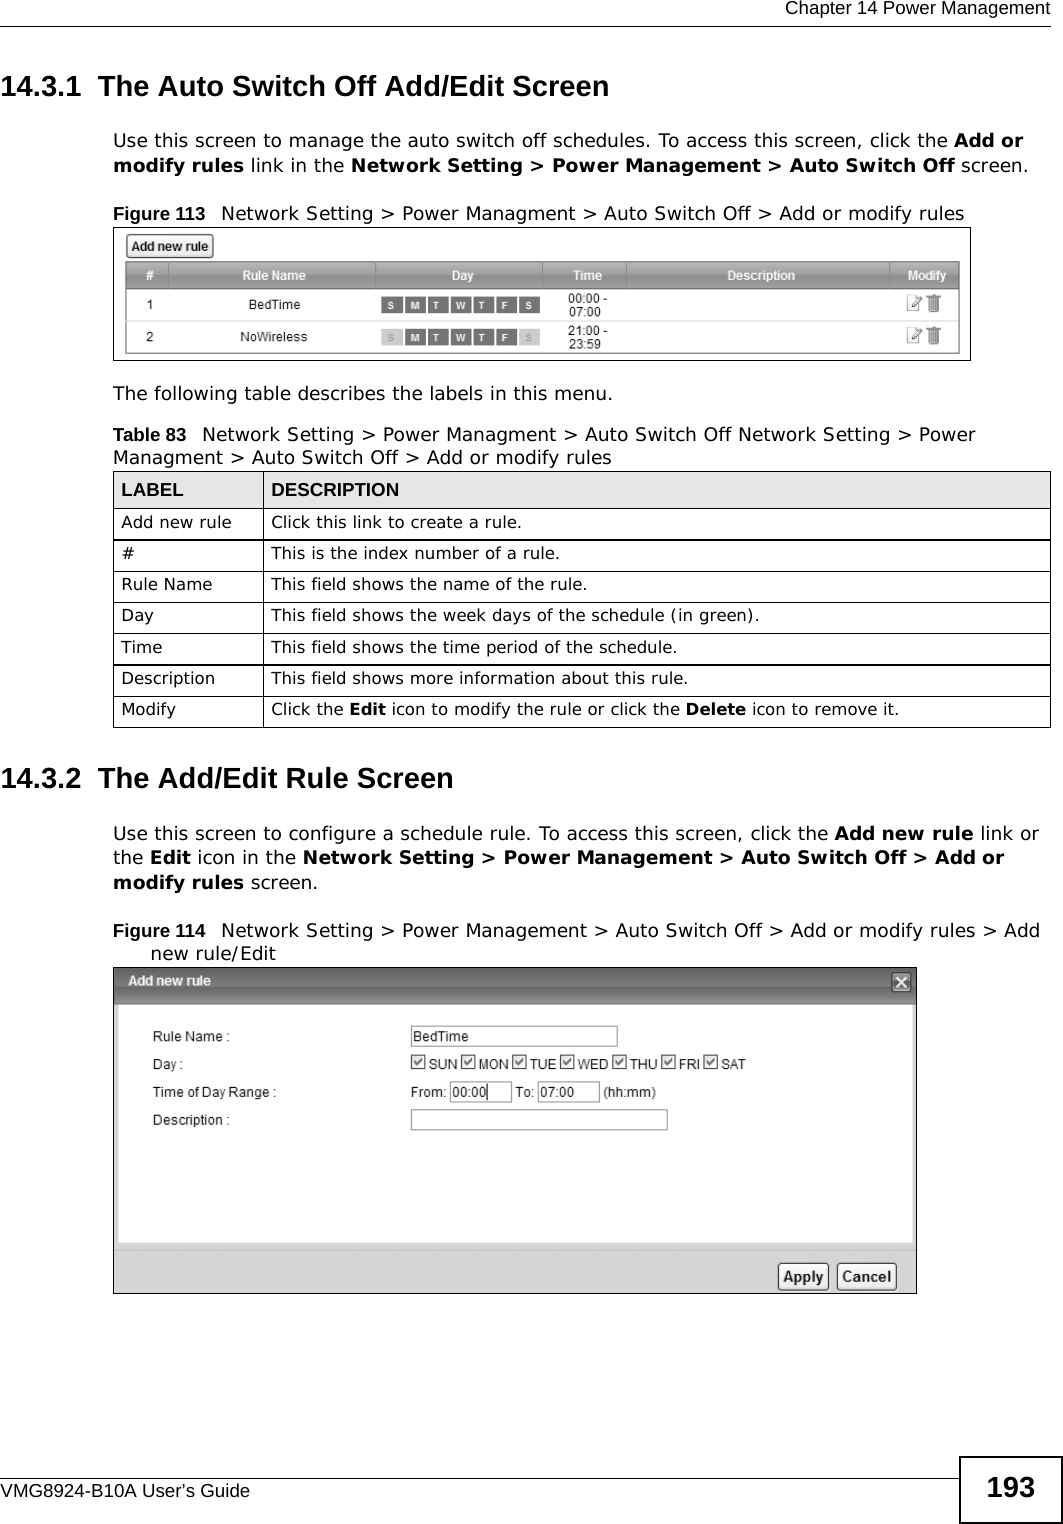  Chapter 14 Power ManagementVMG8924-B10A User’s Guide 19314.3.1  The Auto Switch Off Add/Edit ScreenUse this screen to manage the auto switch off schedules. To access this screen, click the Add or modify rules link in the Network Setting &gt; Power Management &gt; Auto Switch Off screen.Figure 113   Network Setting &gt; Power Managment &gt; Auto Switch Off &gt; Add or modify rulesThe following table describes the labels in this menu.14.3.2  The Add/Edit Rule ScreenUse this screen to configure a schedule rule. To access this screen, click the Add new rule link or the Edit icon in the Network Setting &gt; Power Management &gt; Auto Switch Off &gt; Add or modify rules screen.Figure 114   Network Setting &gt; Power Management &gt; Auto Switch Off &gt; Add or modify rules &gt; Add new rule/EditTable 83   Network Setting &gt; Power Managment &gt; Auto Switch Off Network Setting &gt; Power Managment &gt; Auto Switch Off &gt; Add or modify rulesLABEL DESCRIPTIONAdd new rule Click this link to create a rule.#This is the index number of a rule.Rule Name This field shows the name of the rule.Day This field shows the week days of the schedule (in green).Time This field shows the time period of the schedule.Description This field shows more information about this rule.Modify Click the Edit icon to modify the rule or click the Delete icon to remove it.